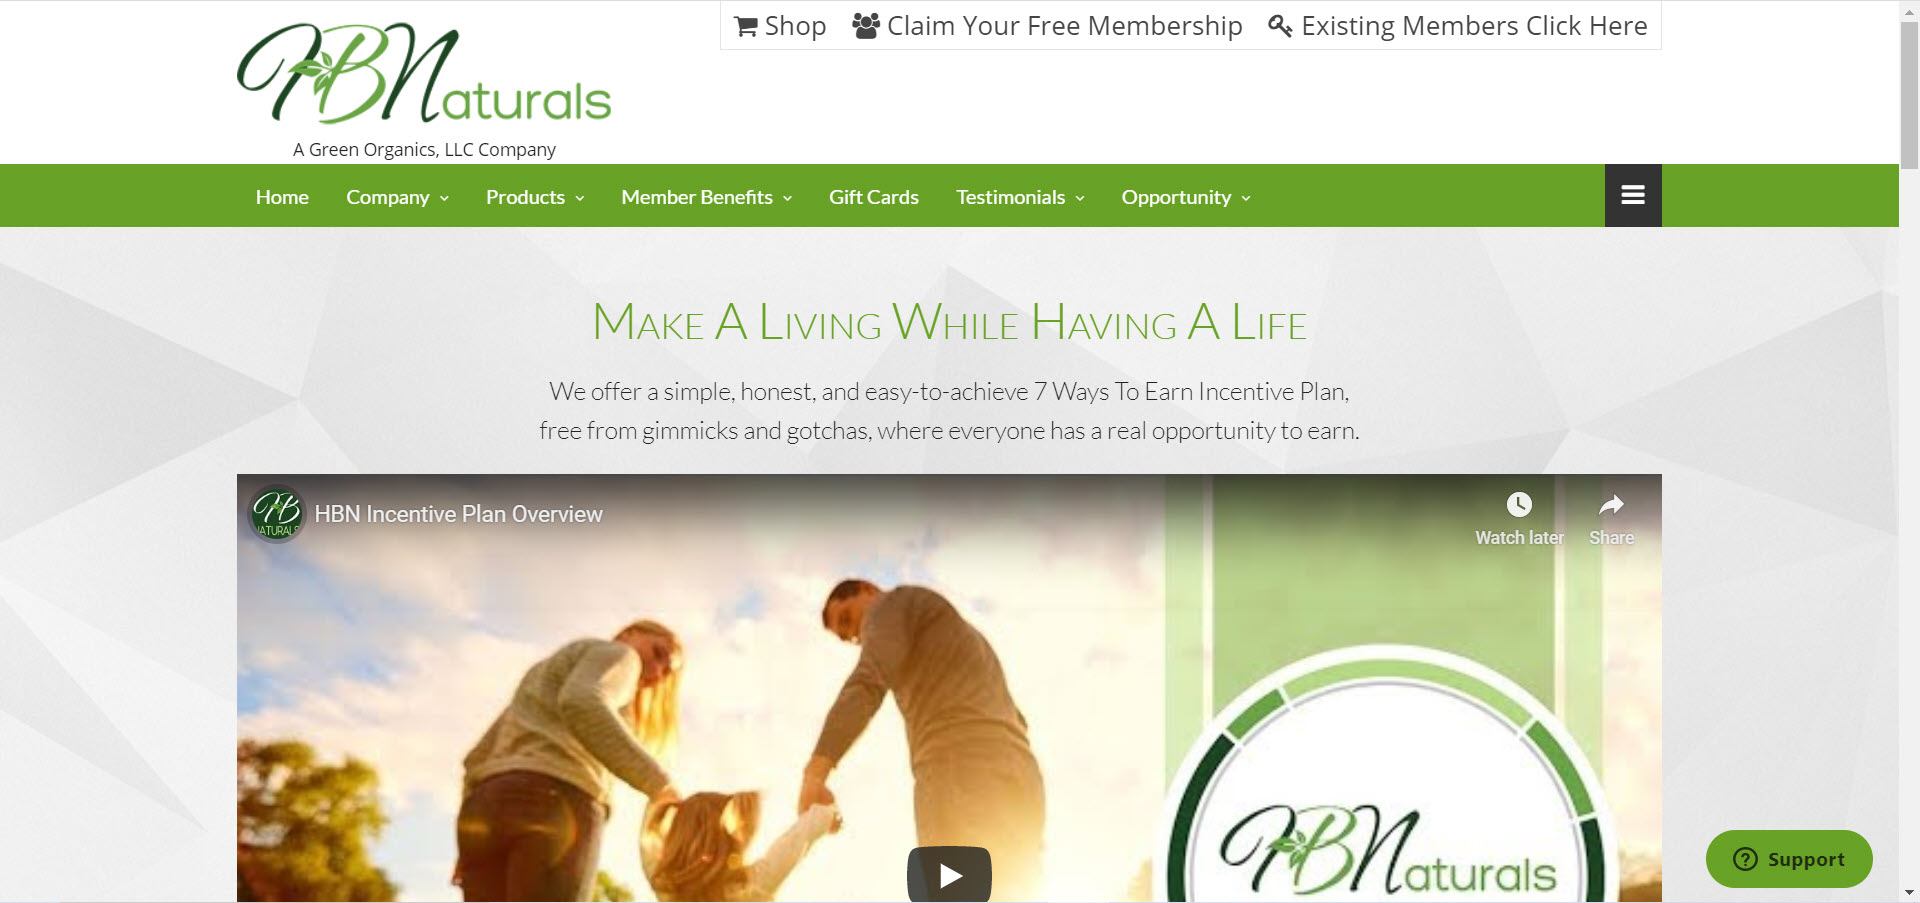 HB Naturals - opportunity page